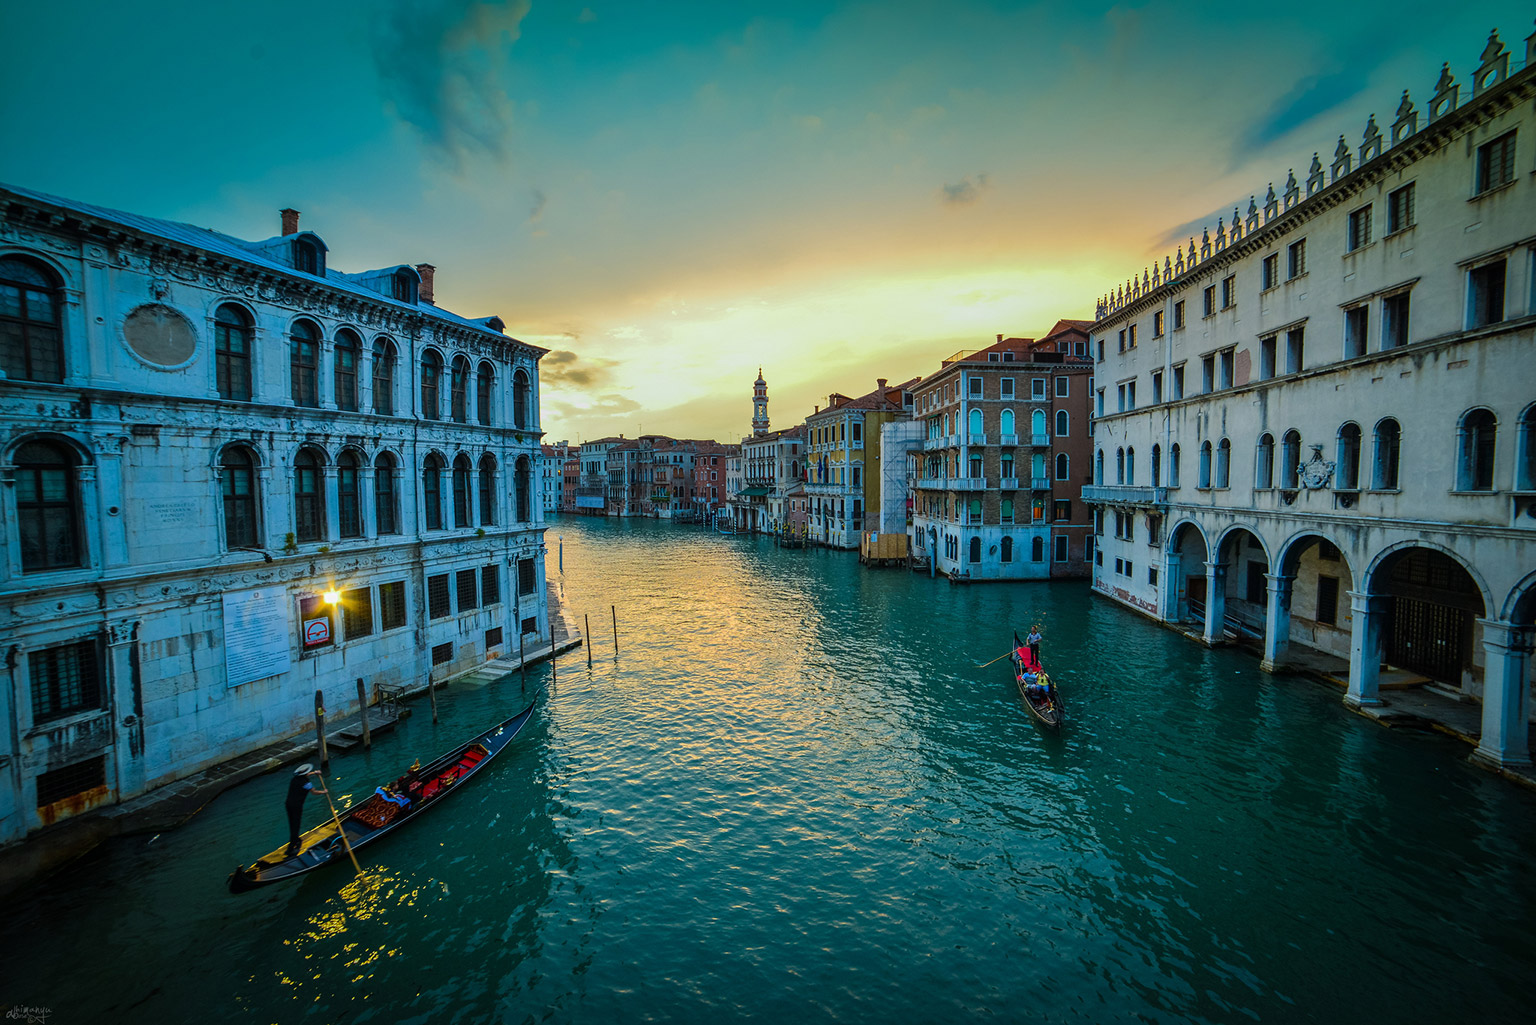 Venice, Italy - dusk shot from the side of Ponte Rialto